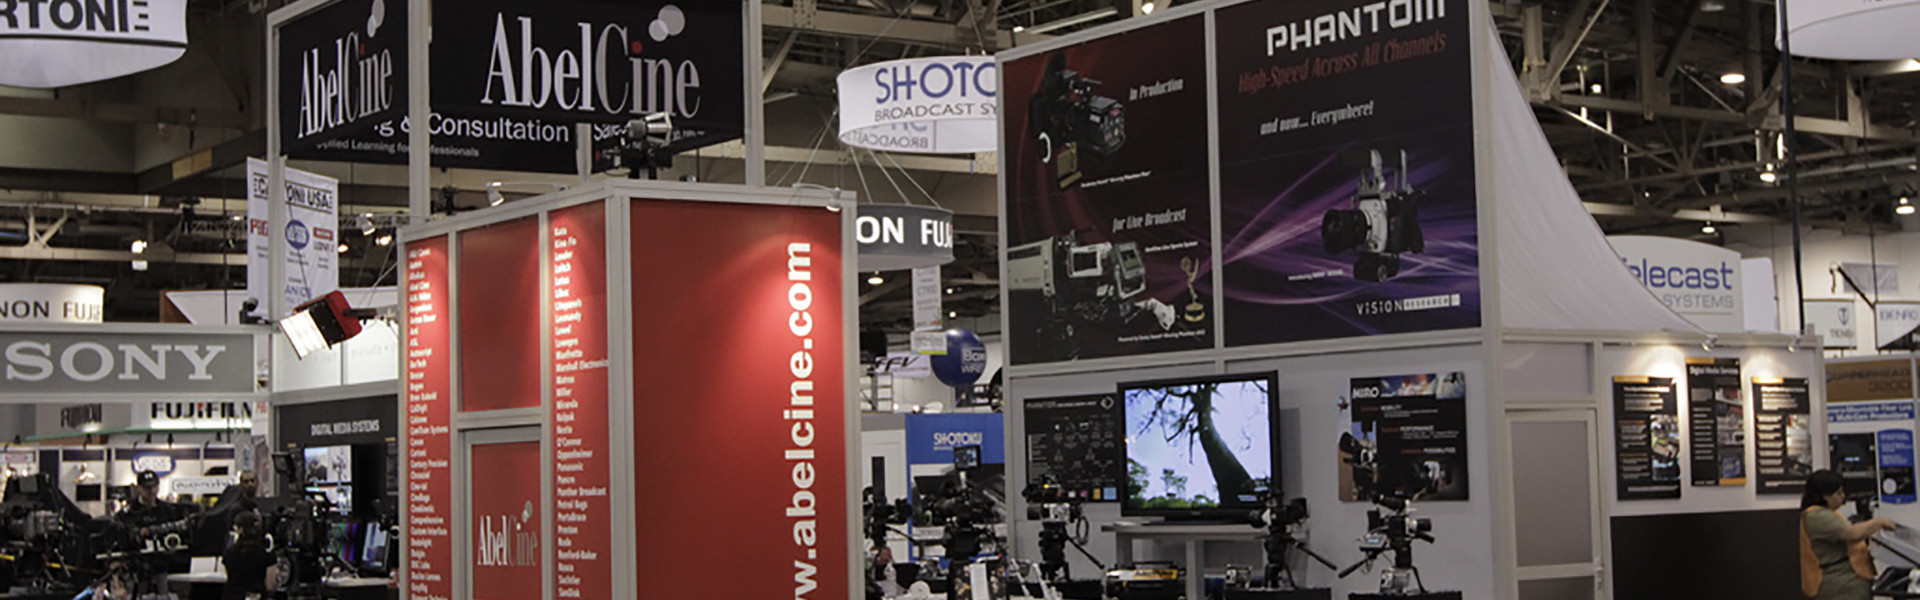 Header image for article NAB '12: The New Teradek Cube with ALEXA Control